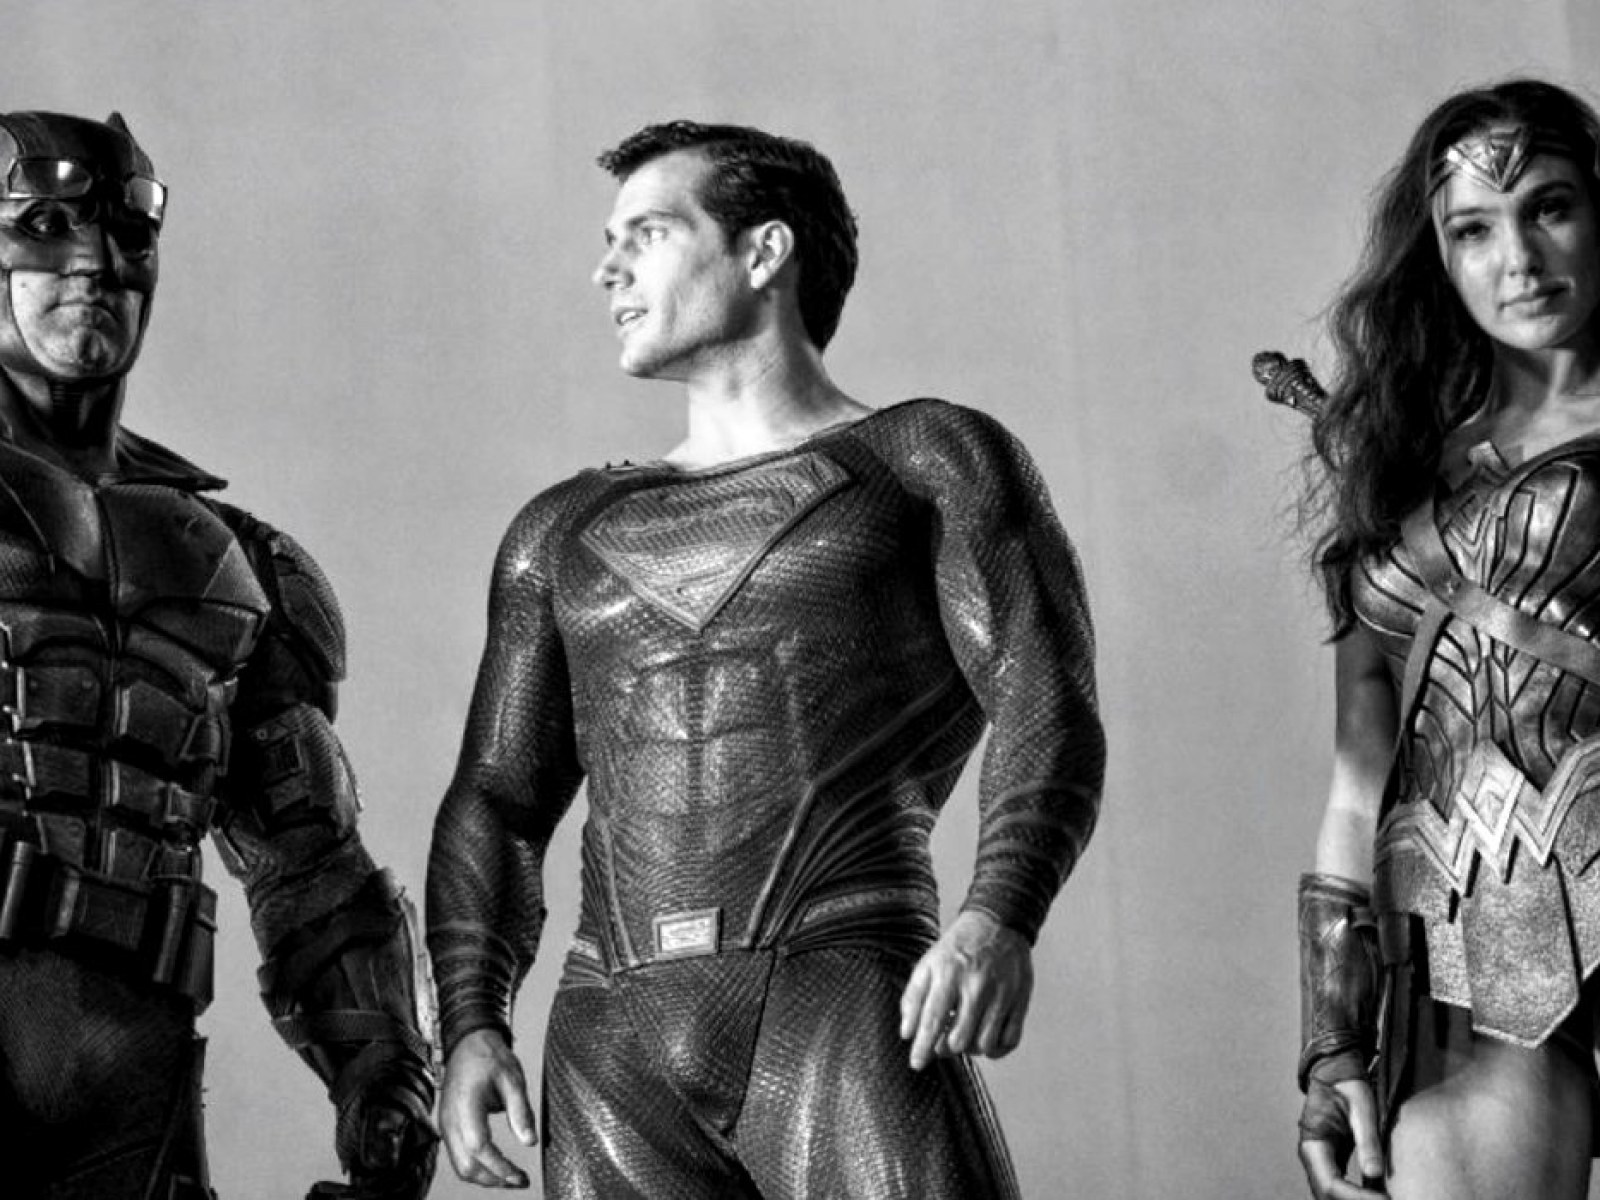 Zack Snyder S Justice League Reveal Hints At New Scenes For Superman Batman And Martian Manhunter